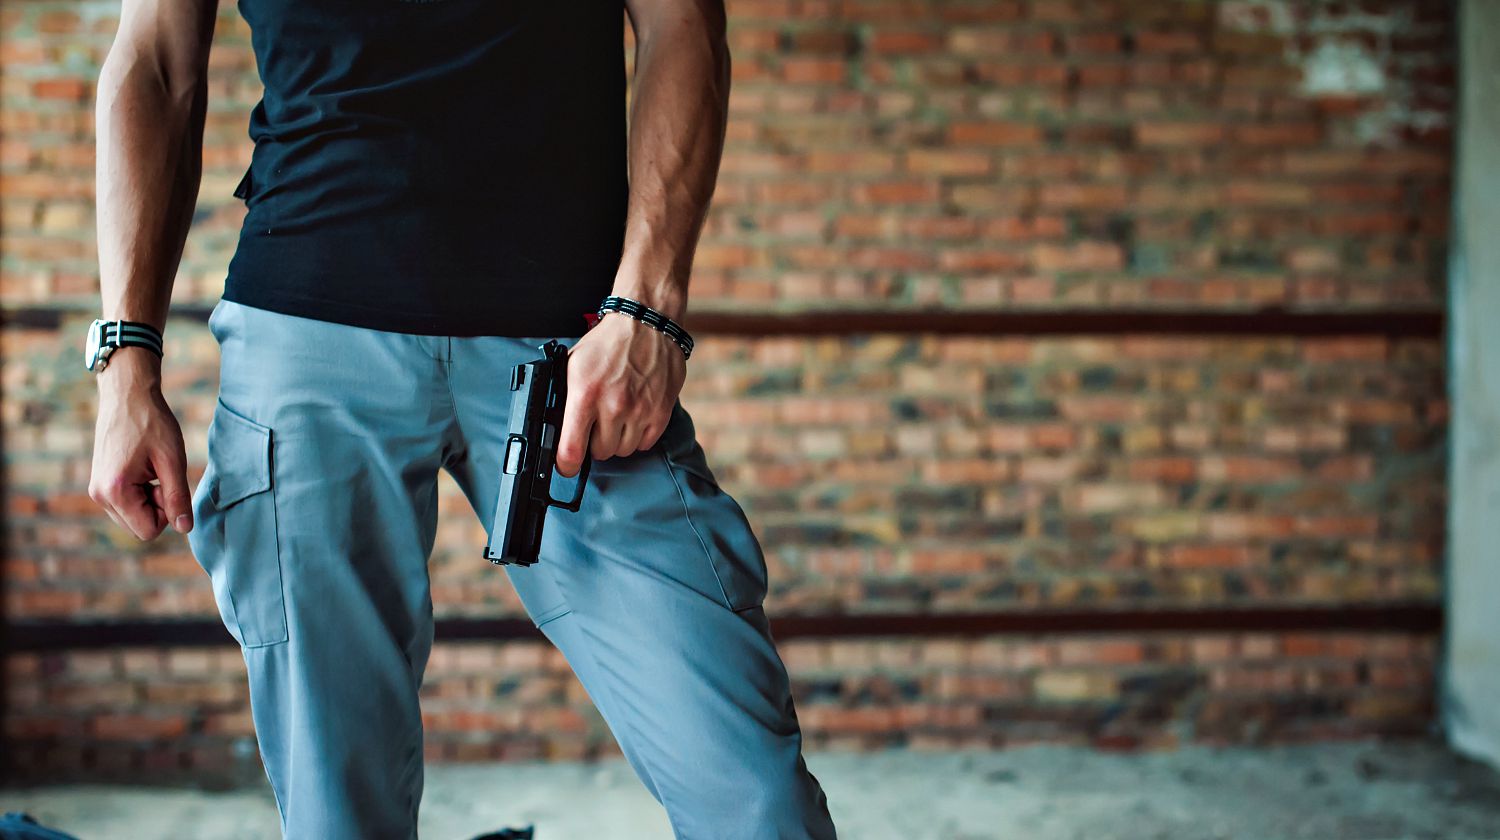 Feature | Dangerous athletic man holding a gun in his hand | Concealed Carry Tips For Gun Owners | Best Gun Concealment